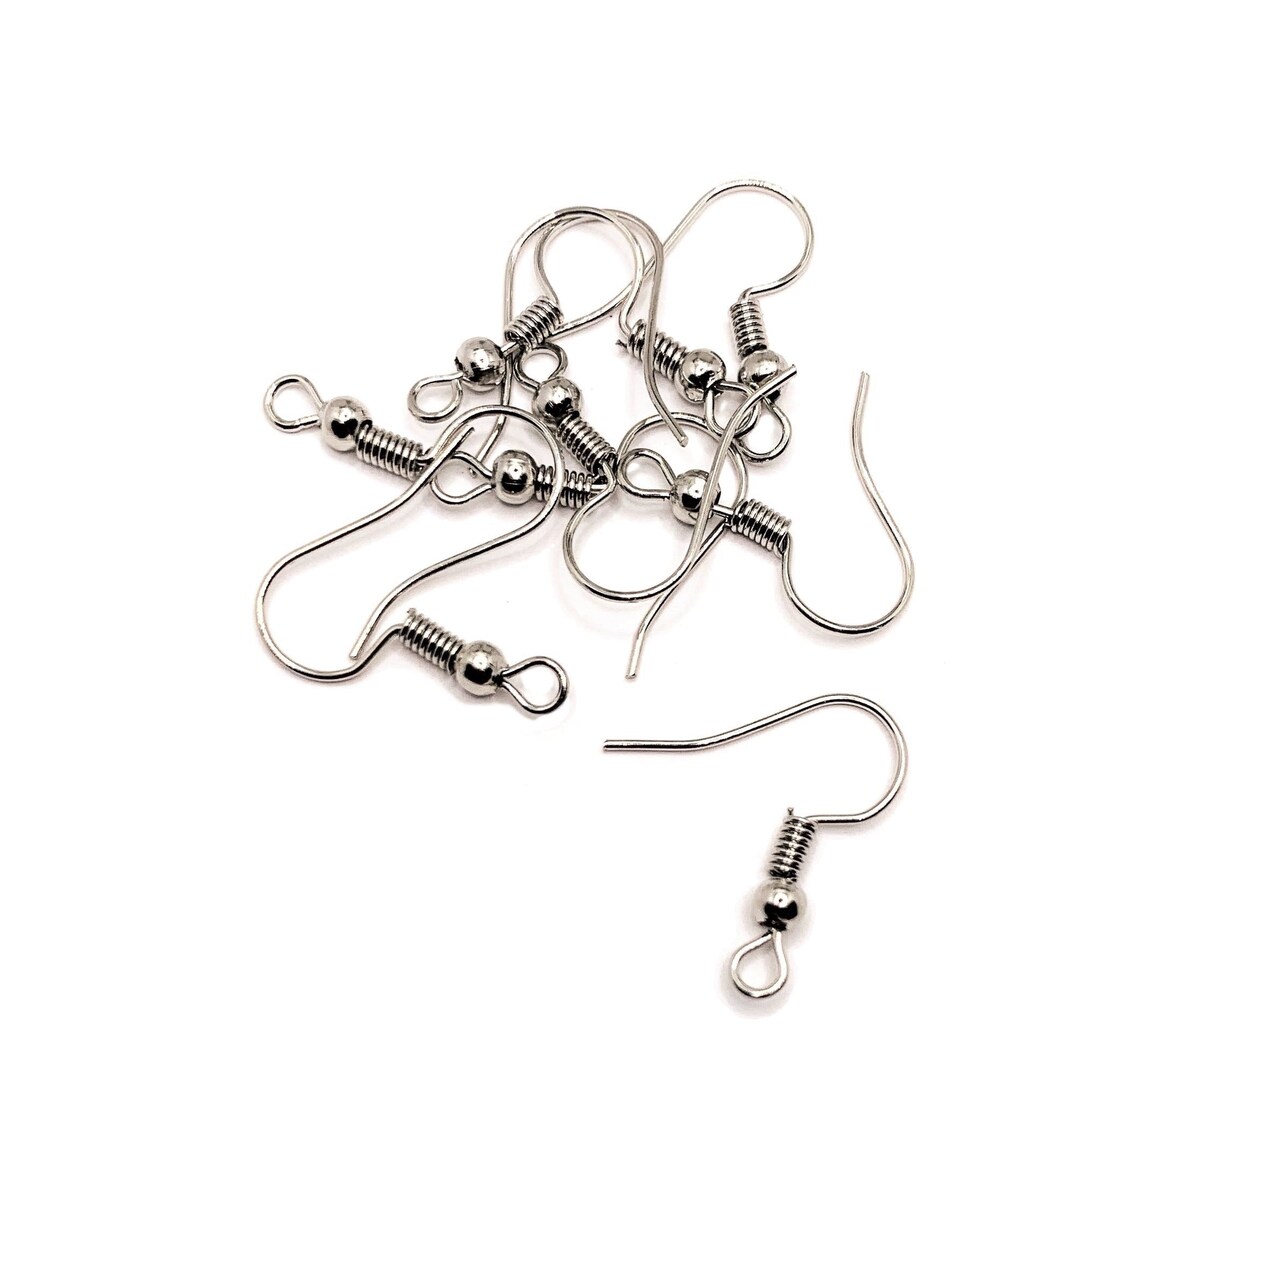 100 or 500 Pieces: Rhodium Silver Fish Hook Earring Wires with Spring and  Ball